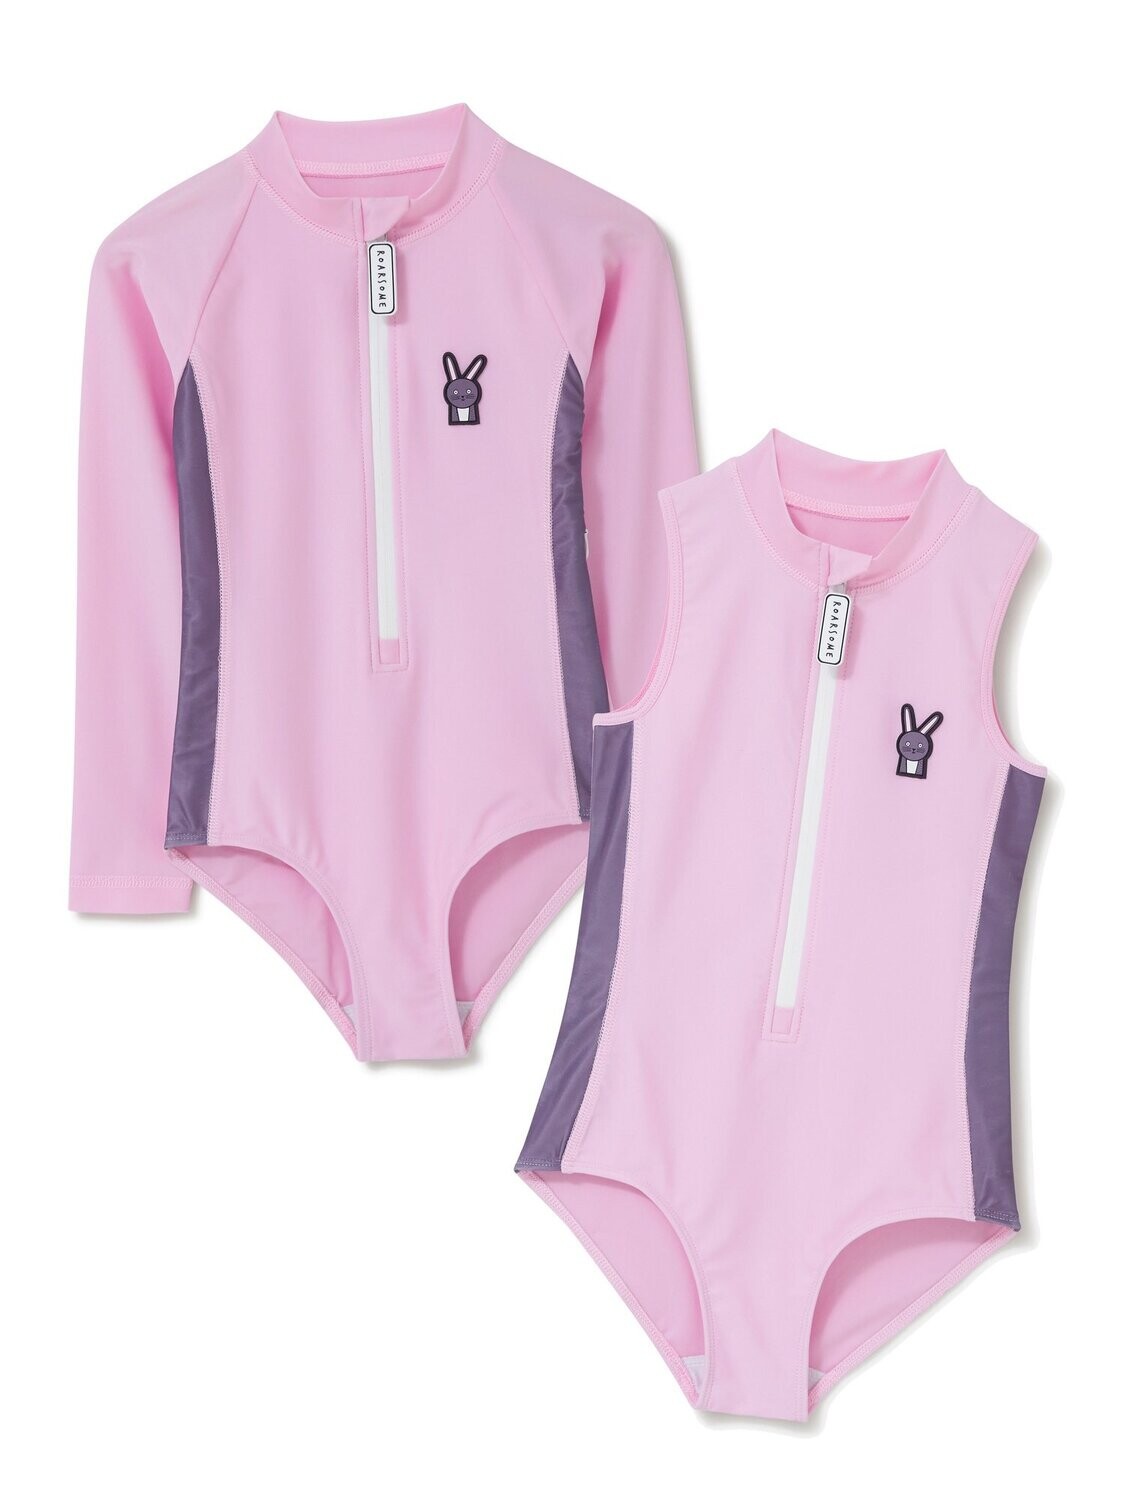 NEW Hop the Bunny - Swimsuit for Girls, Age: 1-2 yrs